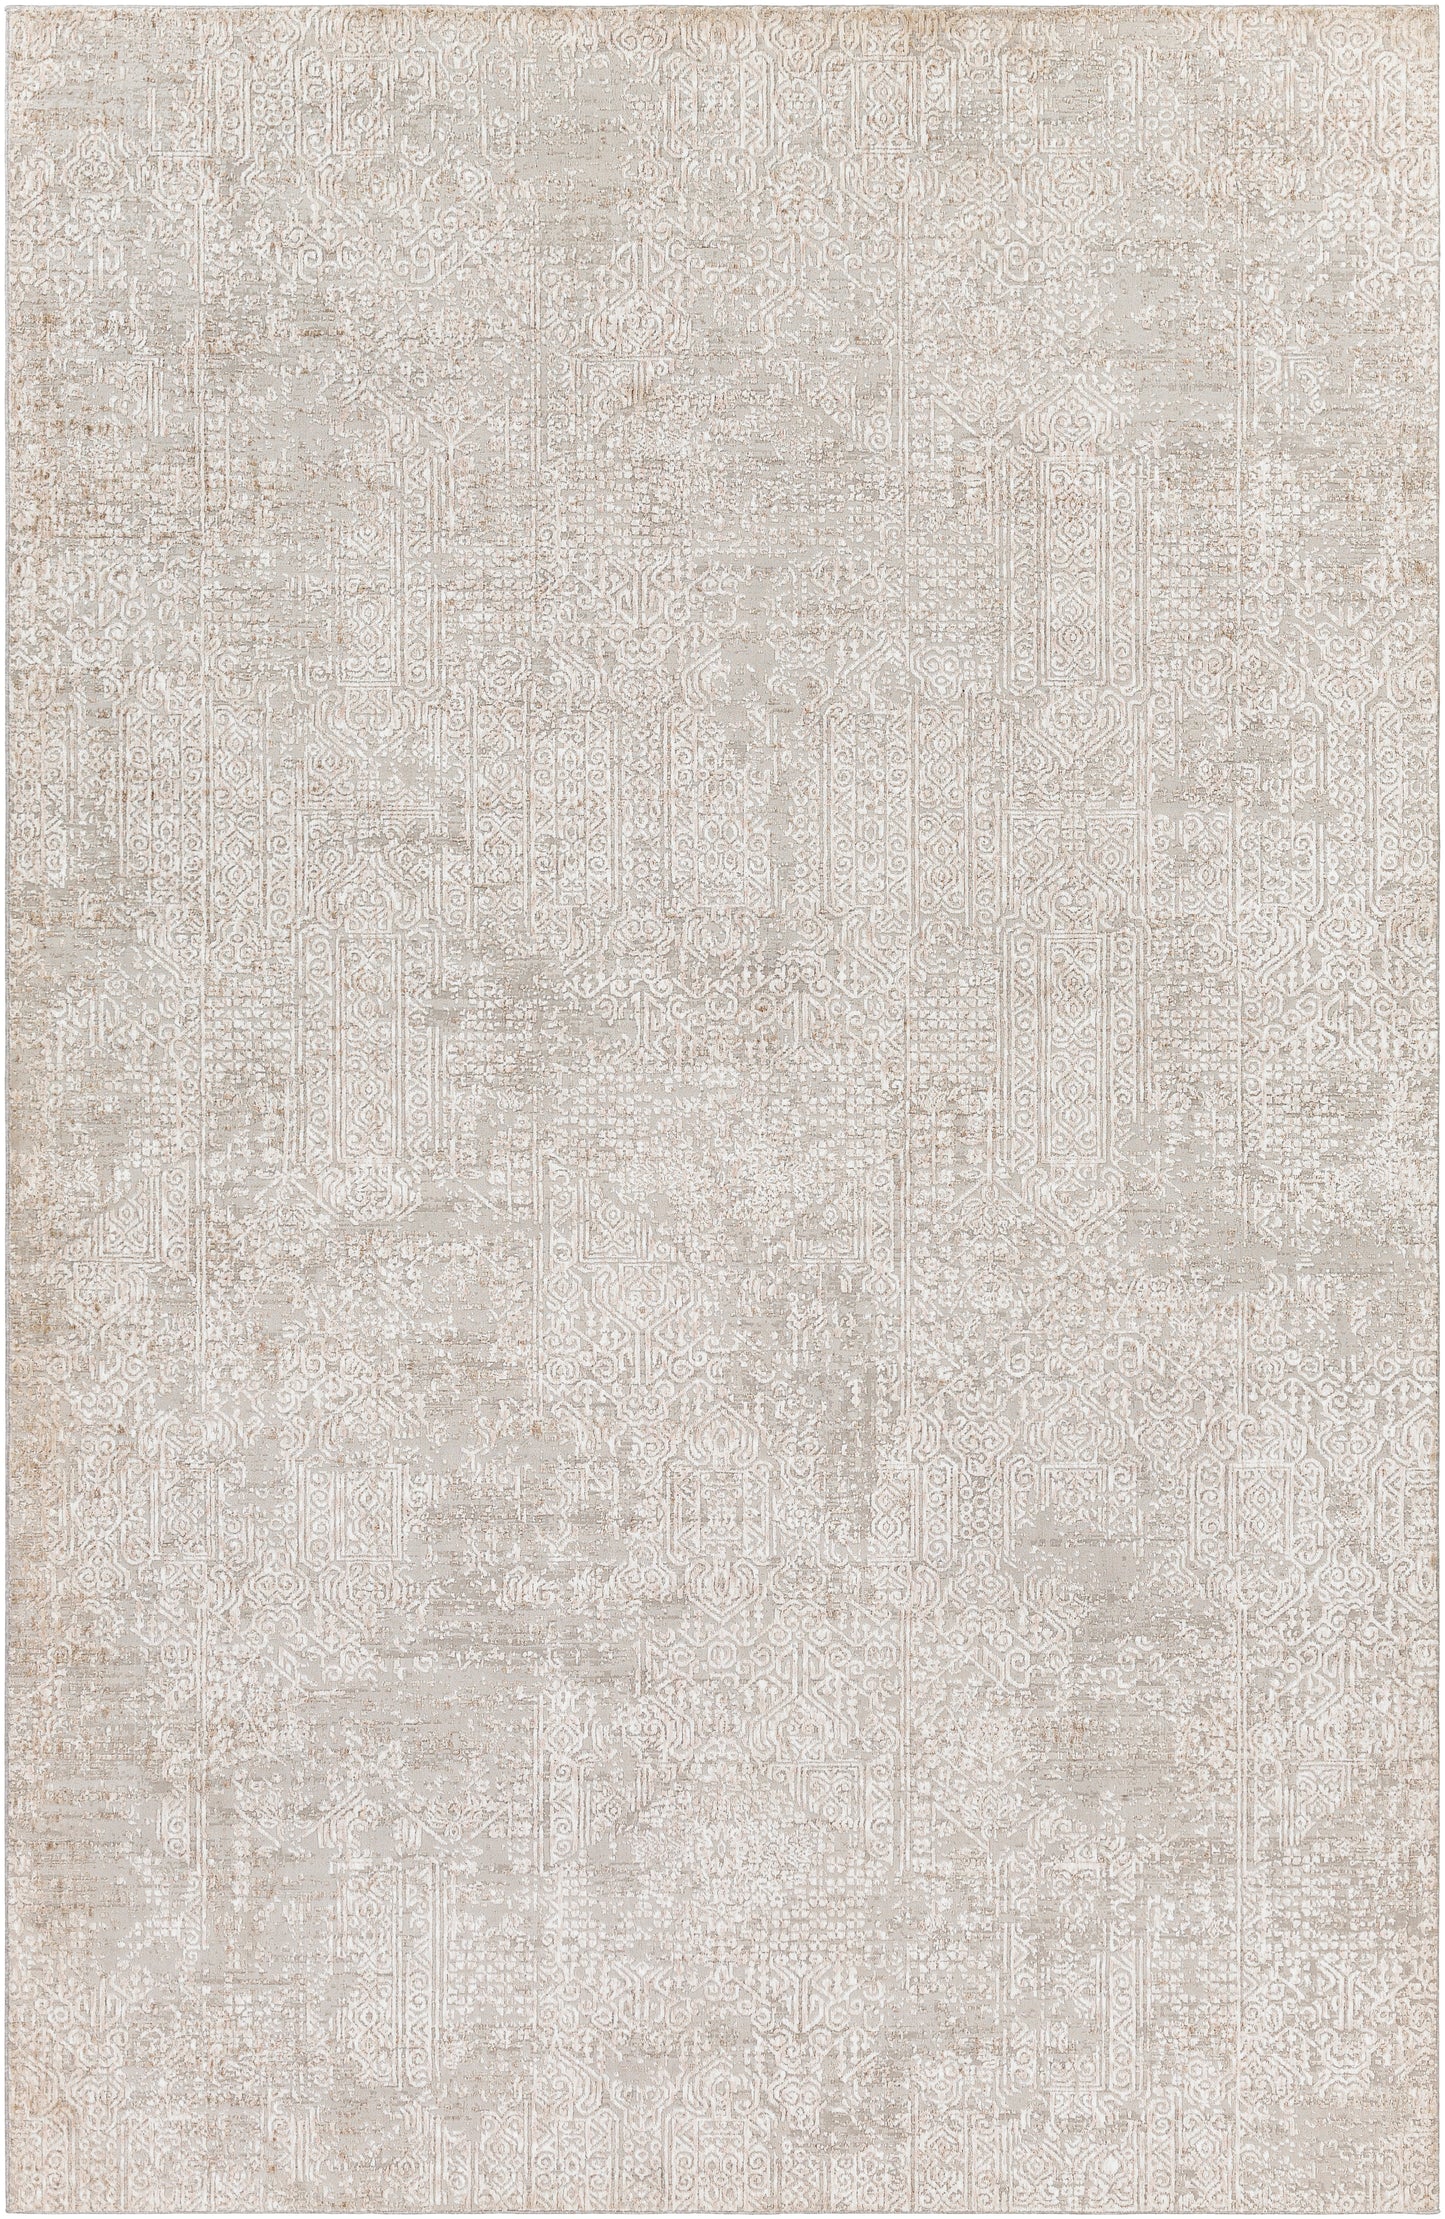 Carmel 26284 Machine Woven Synthetic Blend Indoor Area Rug by Surya Rugs